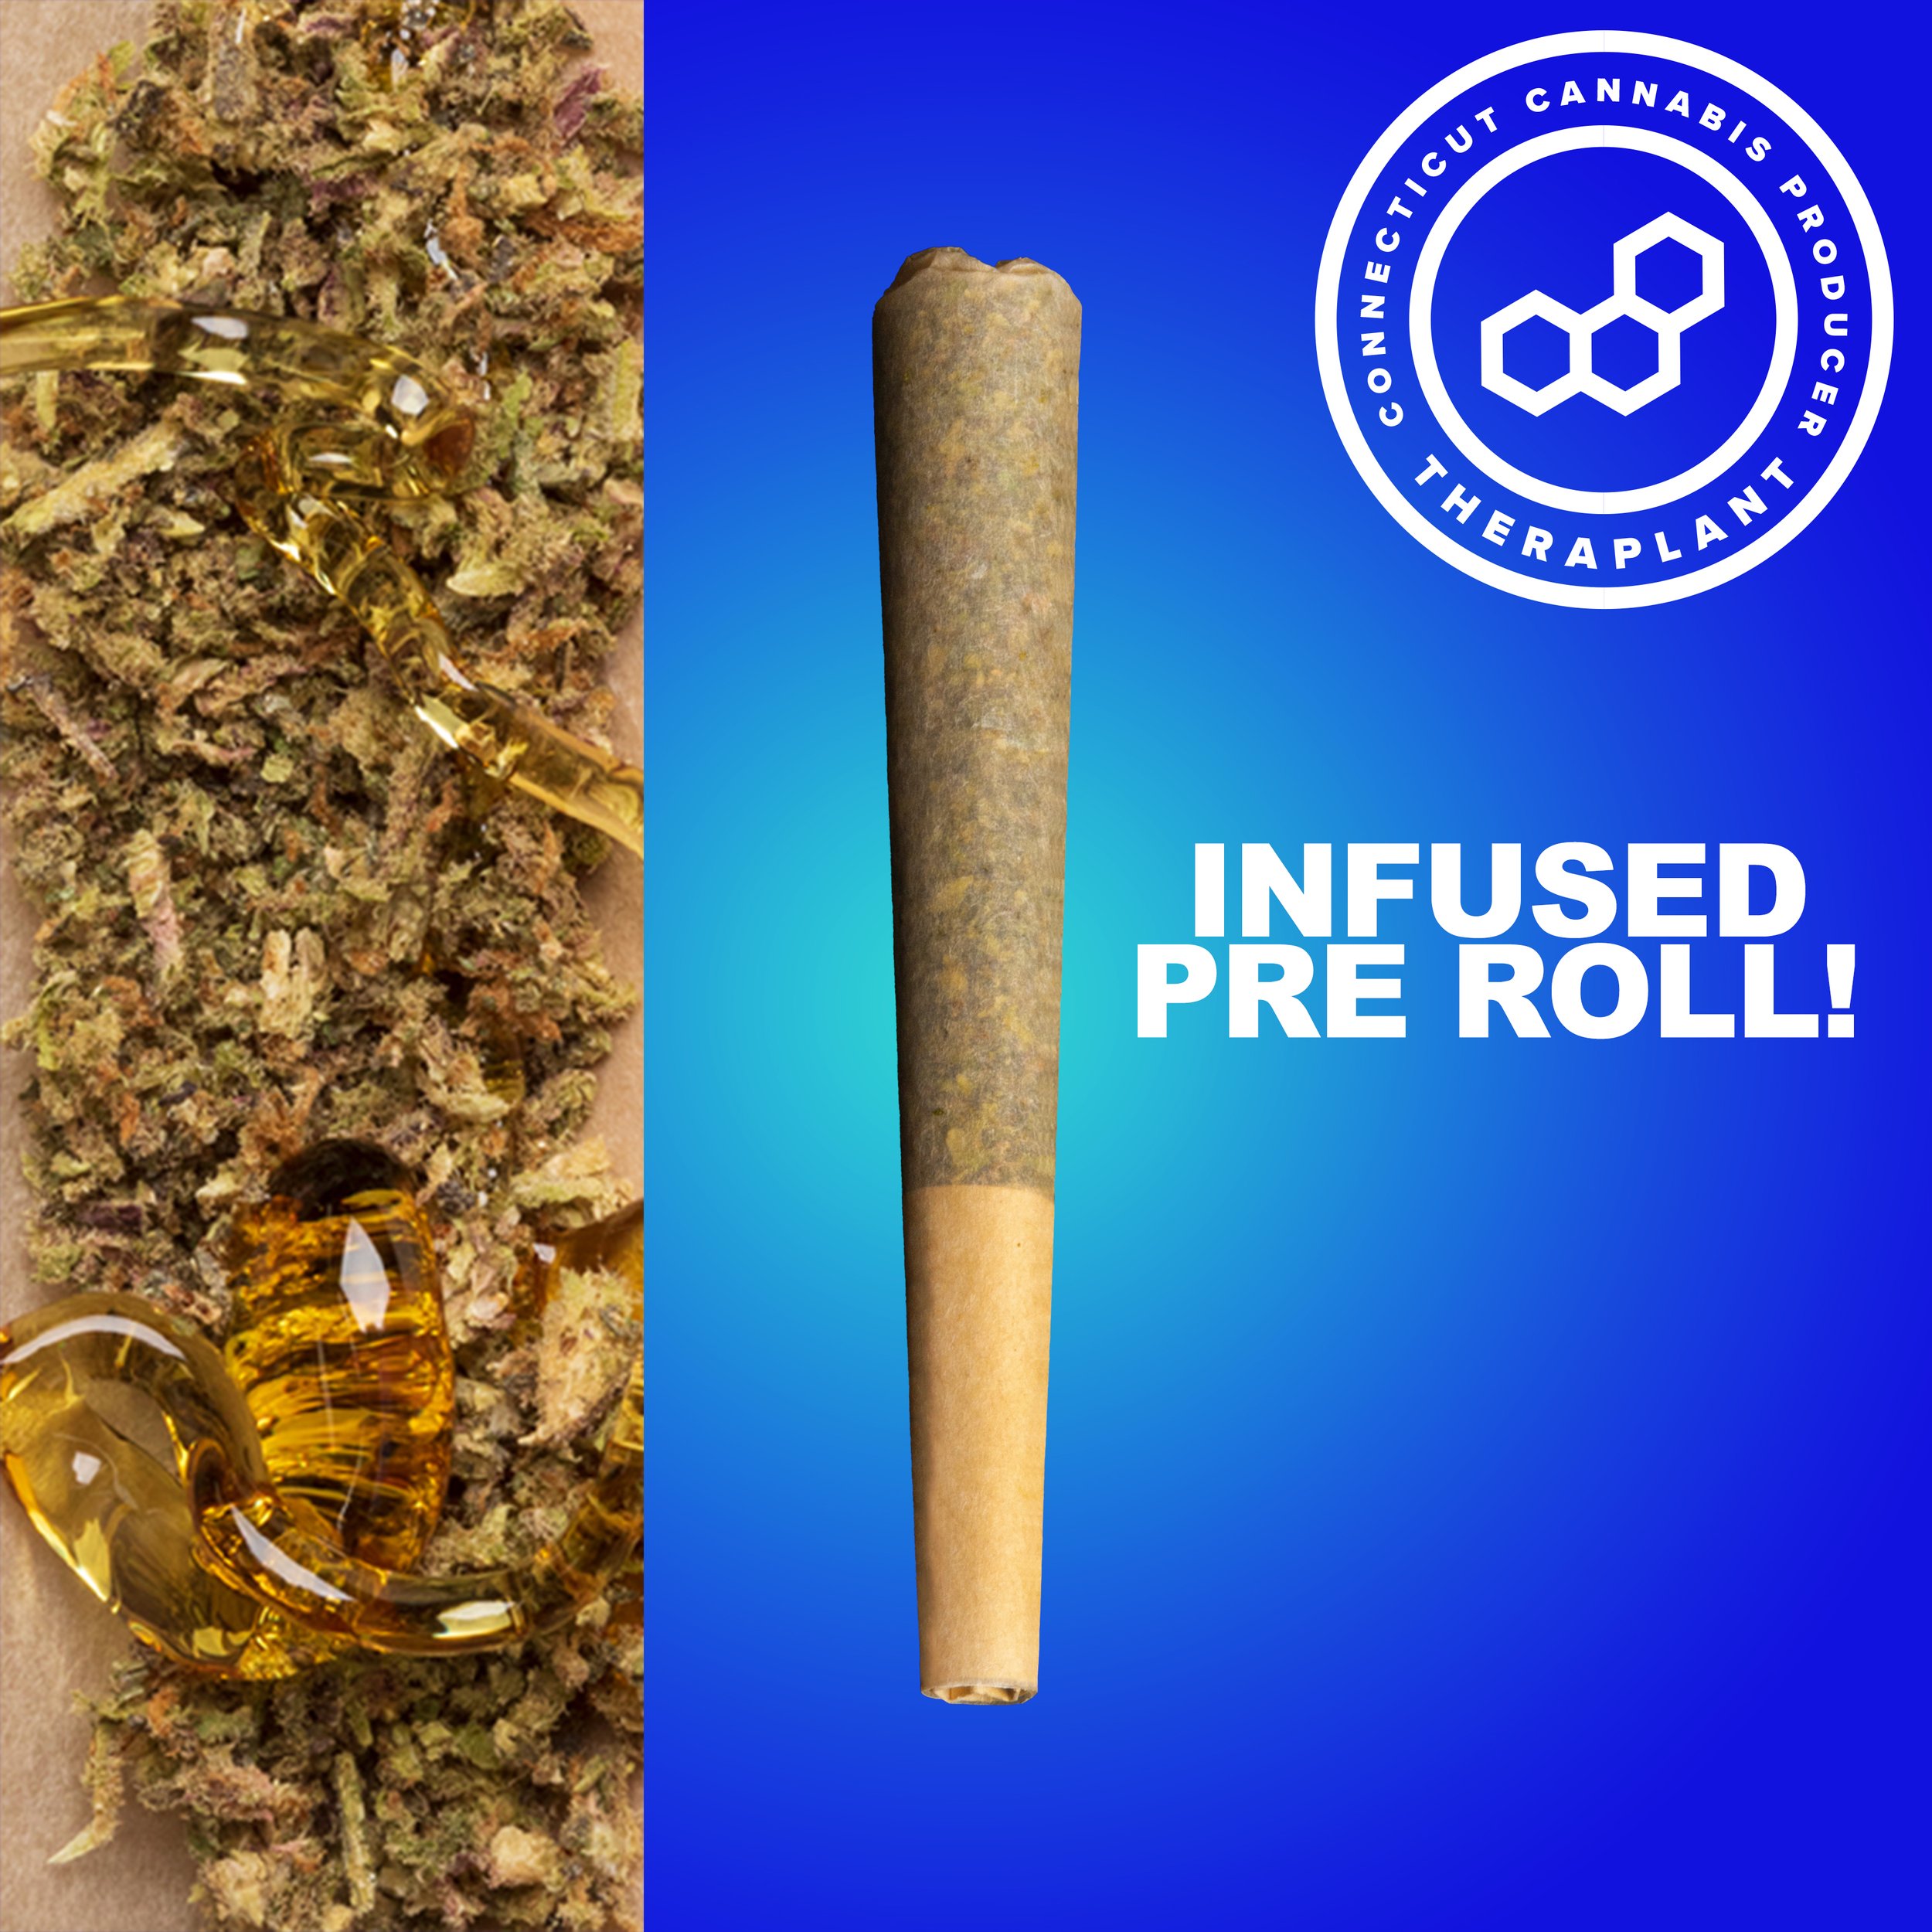 Infused-Pre-Roll-Indica.jpg